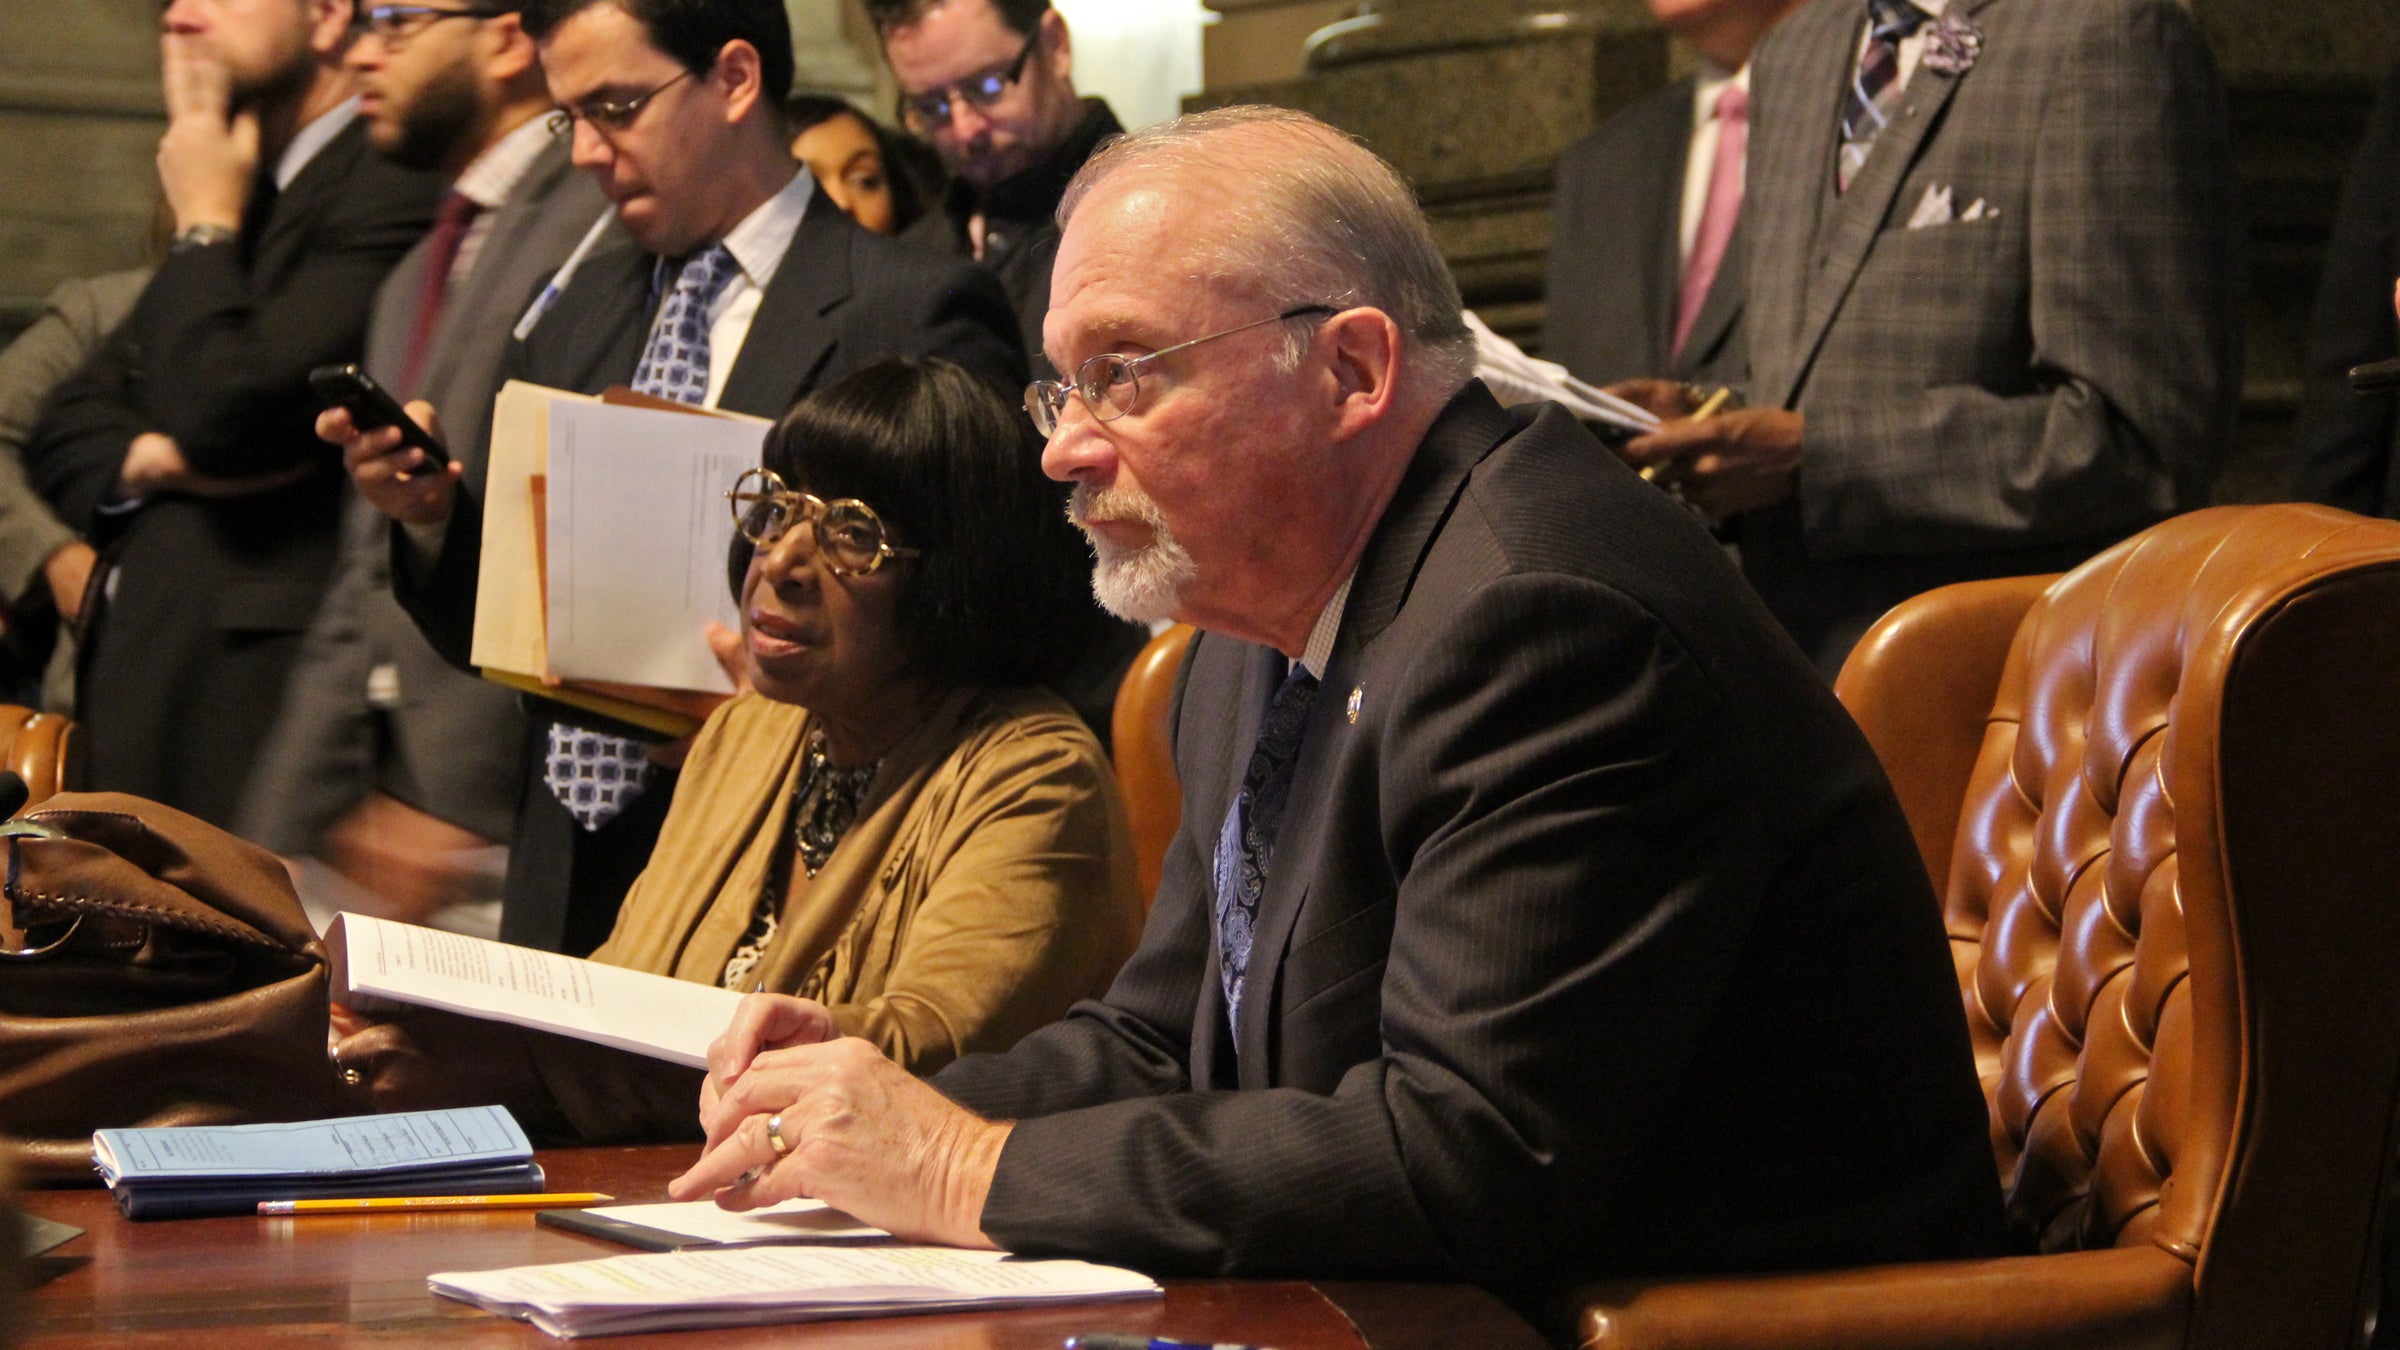  Councilman Bill Greenlee says his bill allows for revoking the business licenses of those who don't pay their workers all they are owed. (Emma Lee/WHYY) 